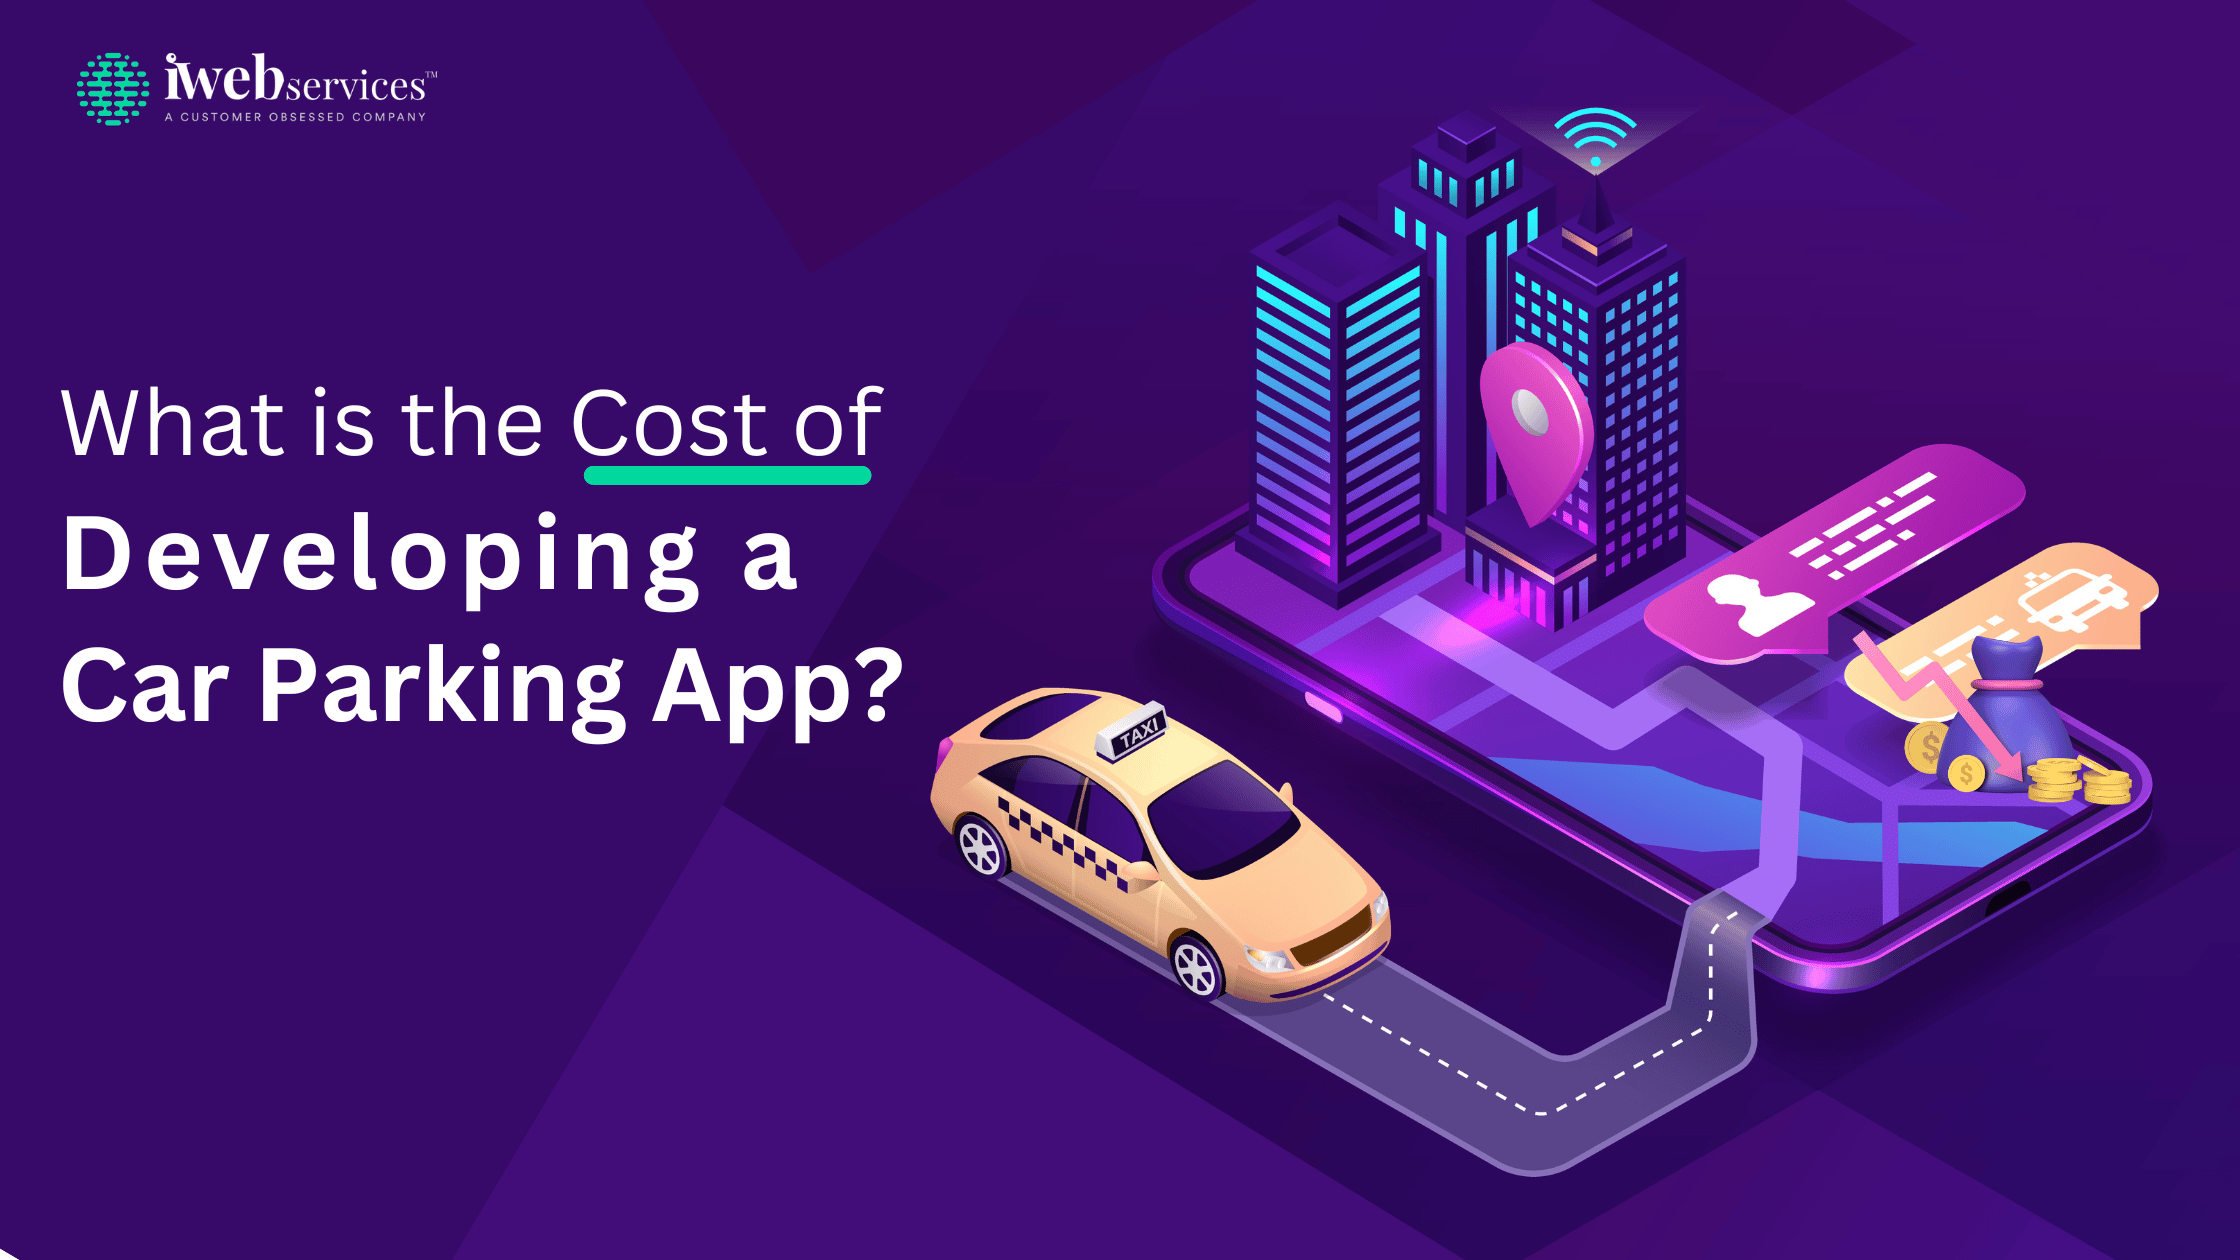 What is the Cost of Developing a Car Parking App?